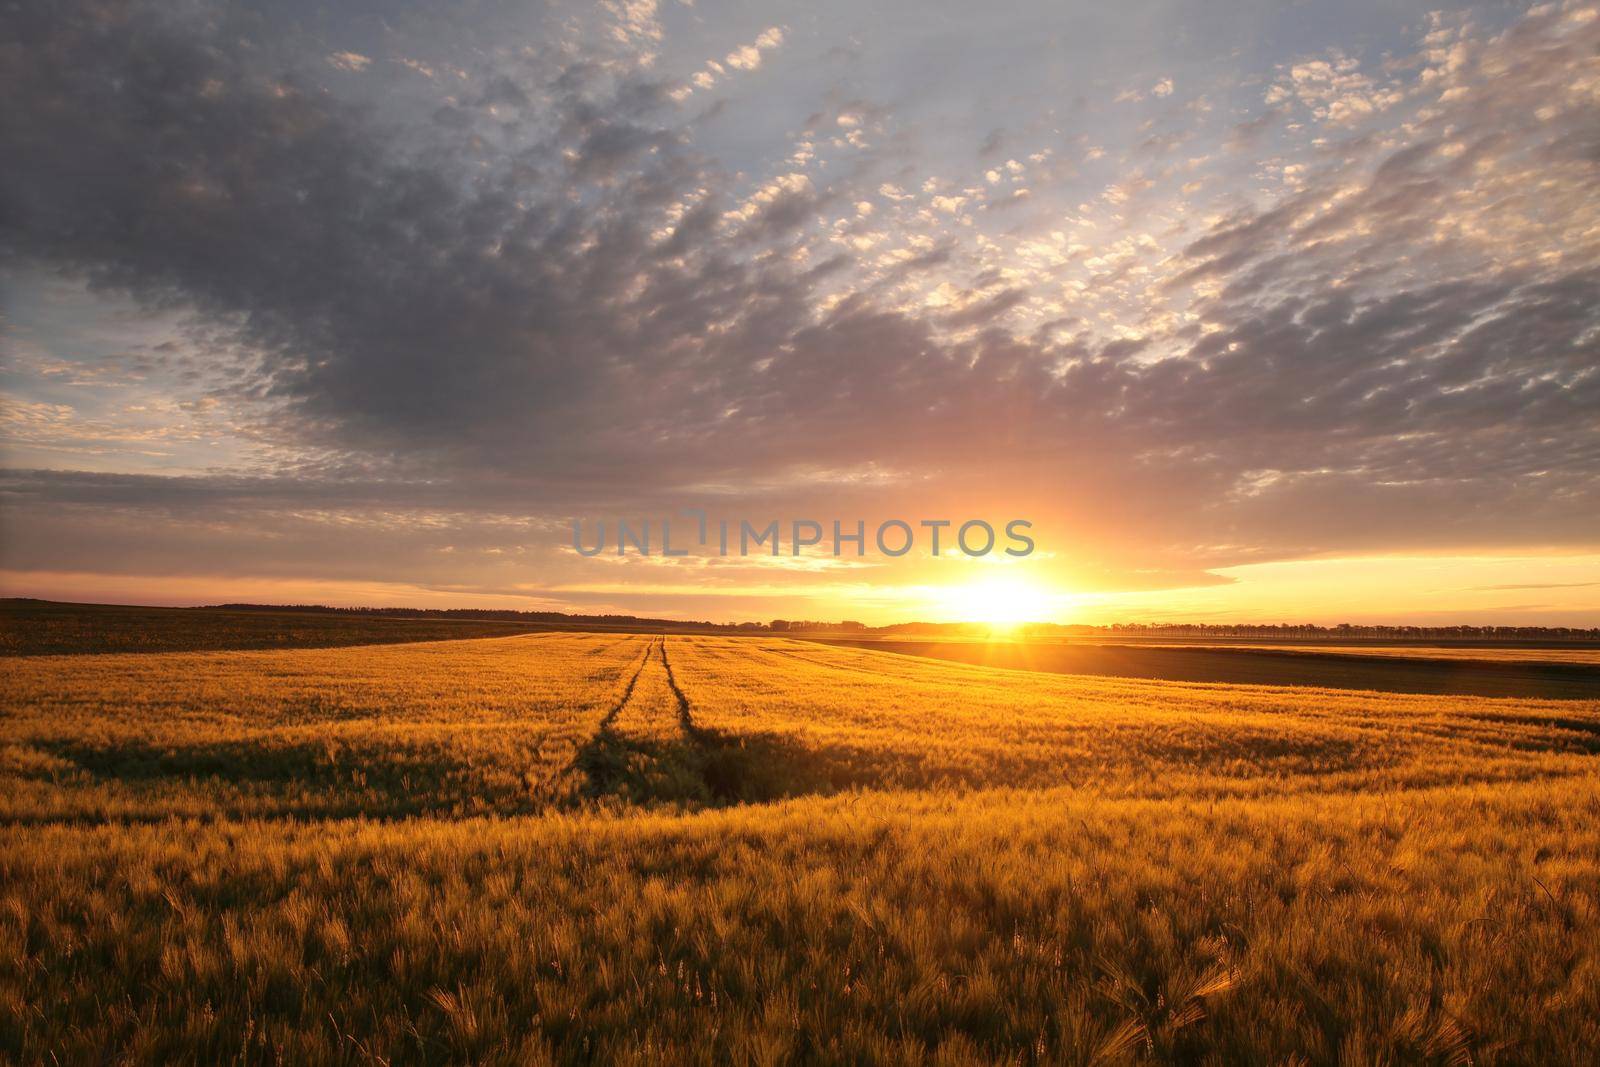 Sunrise over a field by nature78